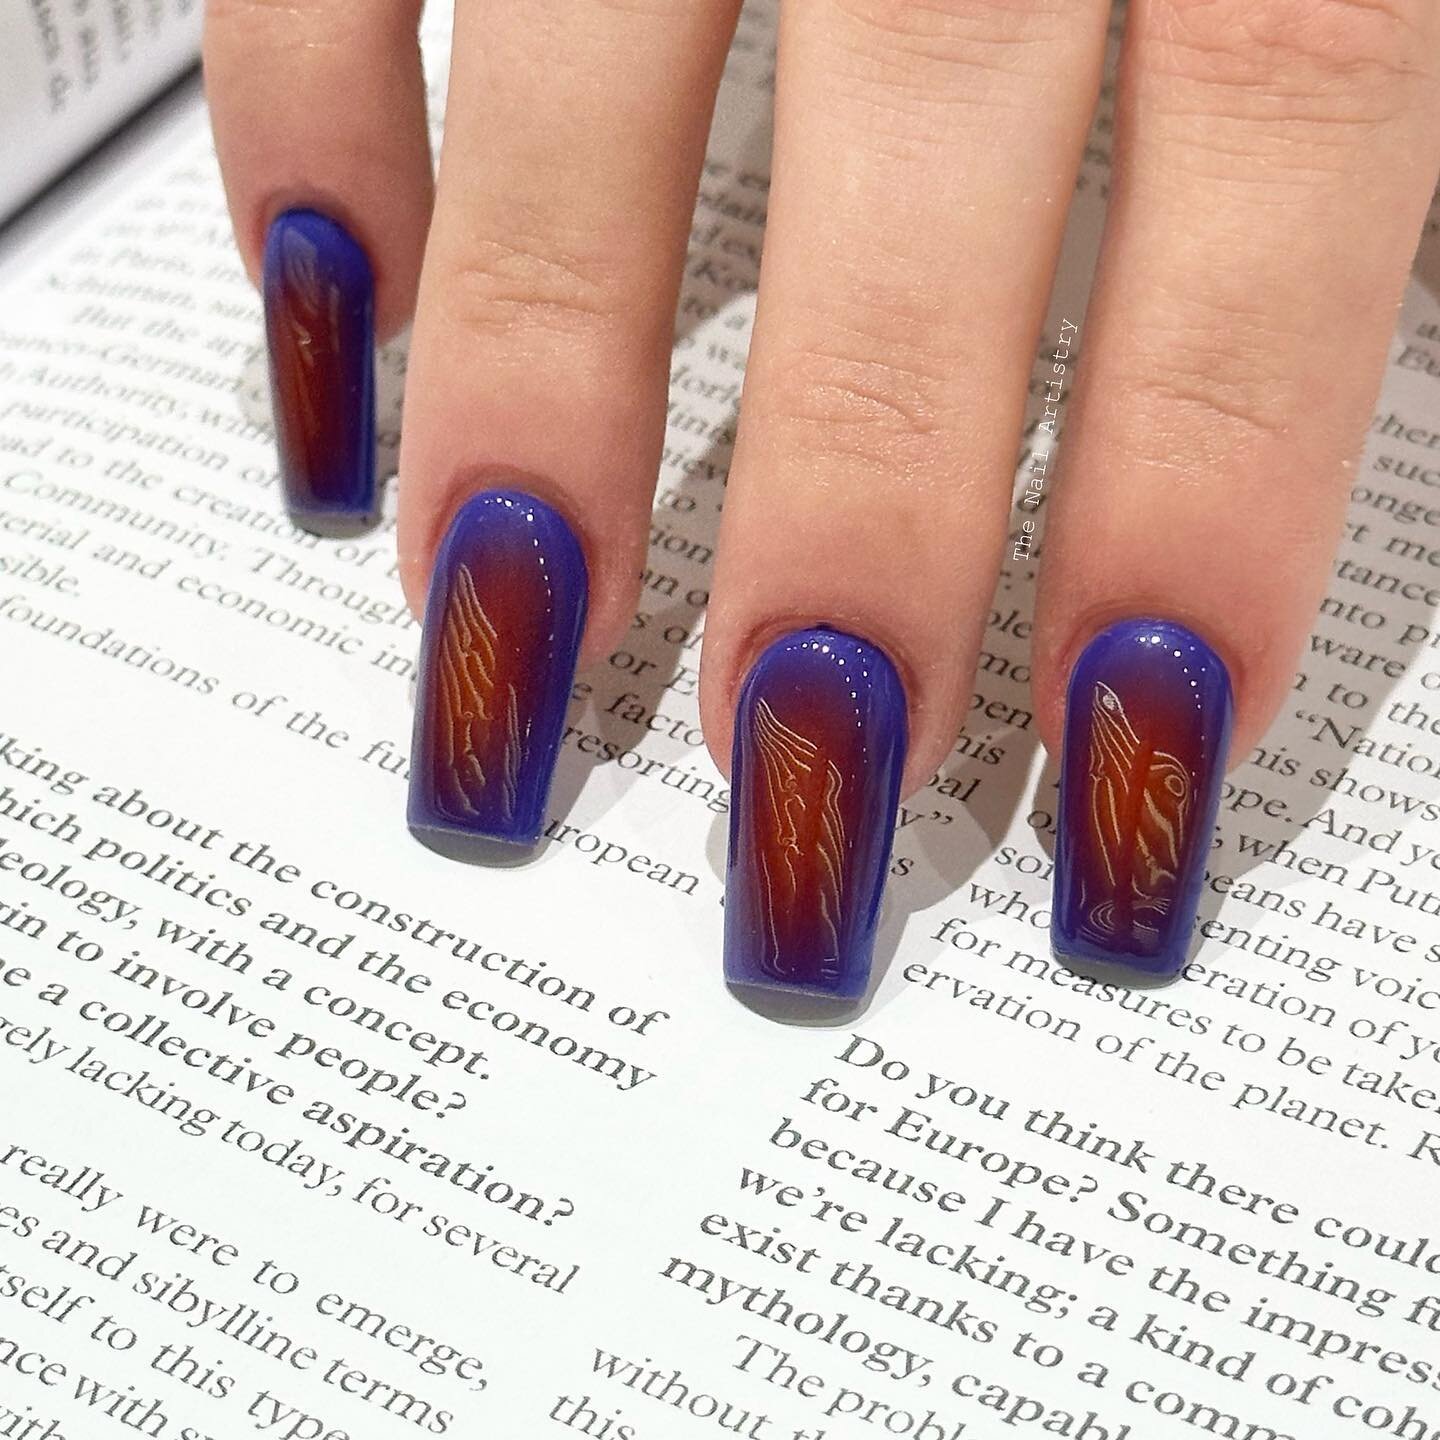 𝐁𝐥𝐮𝐞 &amp; 𝐑𝐞𝐝 𝐀𝐮𝐫𝐚 🌌🫶🏻

When our favourite client always brings in the BEST nails design 💙💙❤️❤️

📲 To book: Select the treatment you want + add-on Nail Arts
.
.
.
.
.
.
#nails #nailsonfleek #nailsofinstagram #nailsart #nailsdesign #